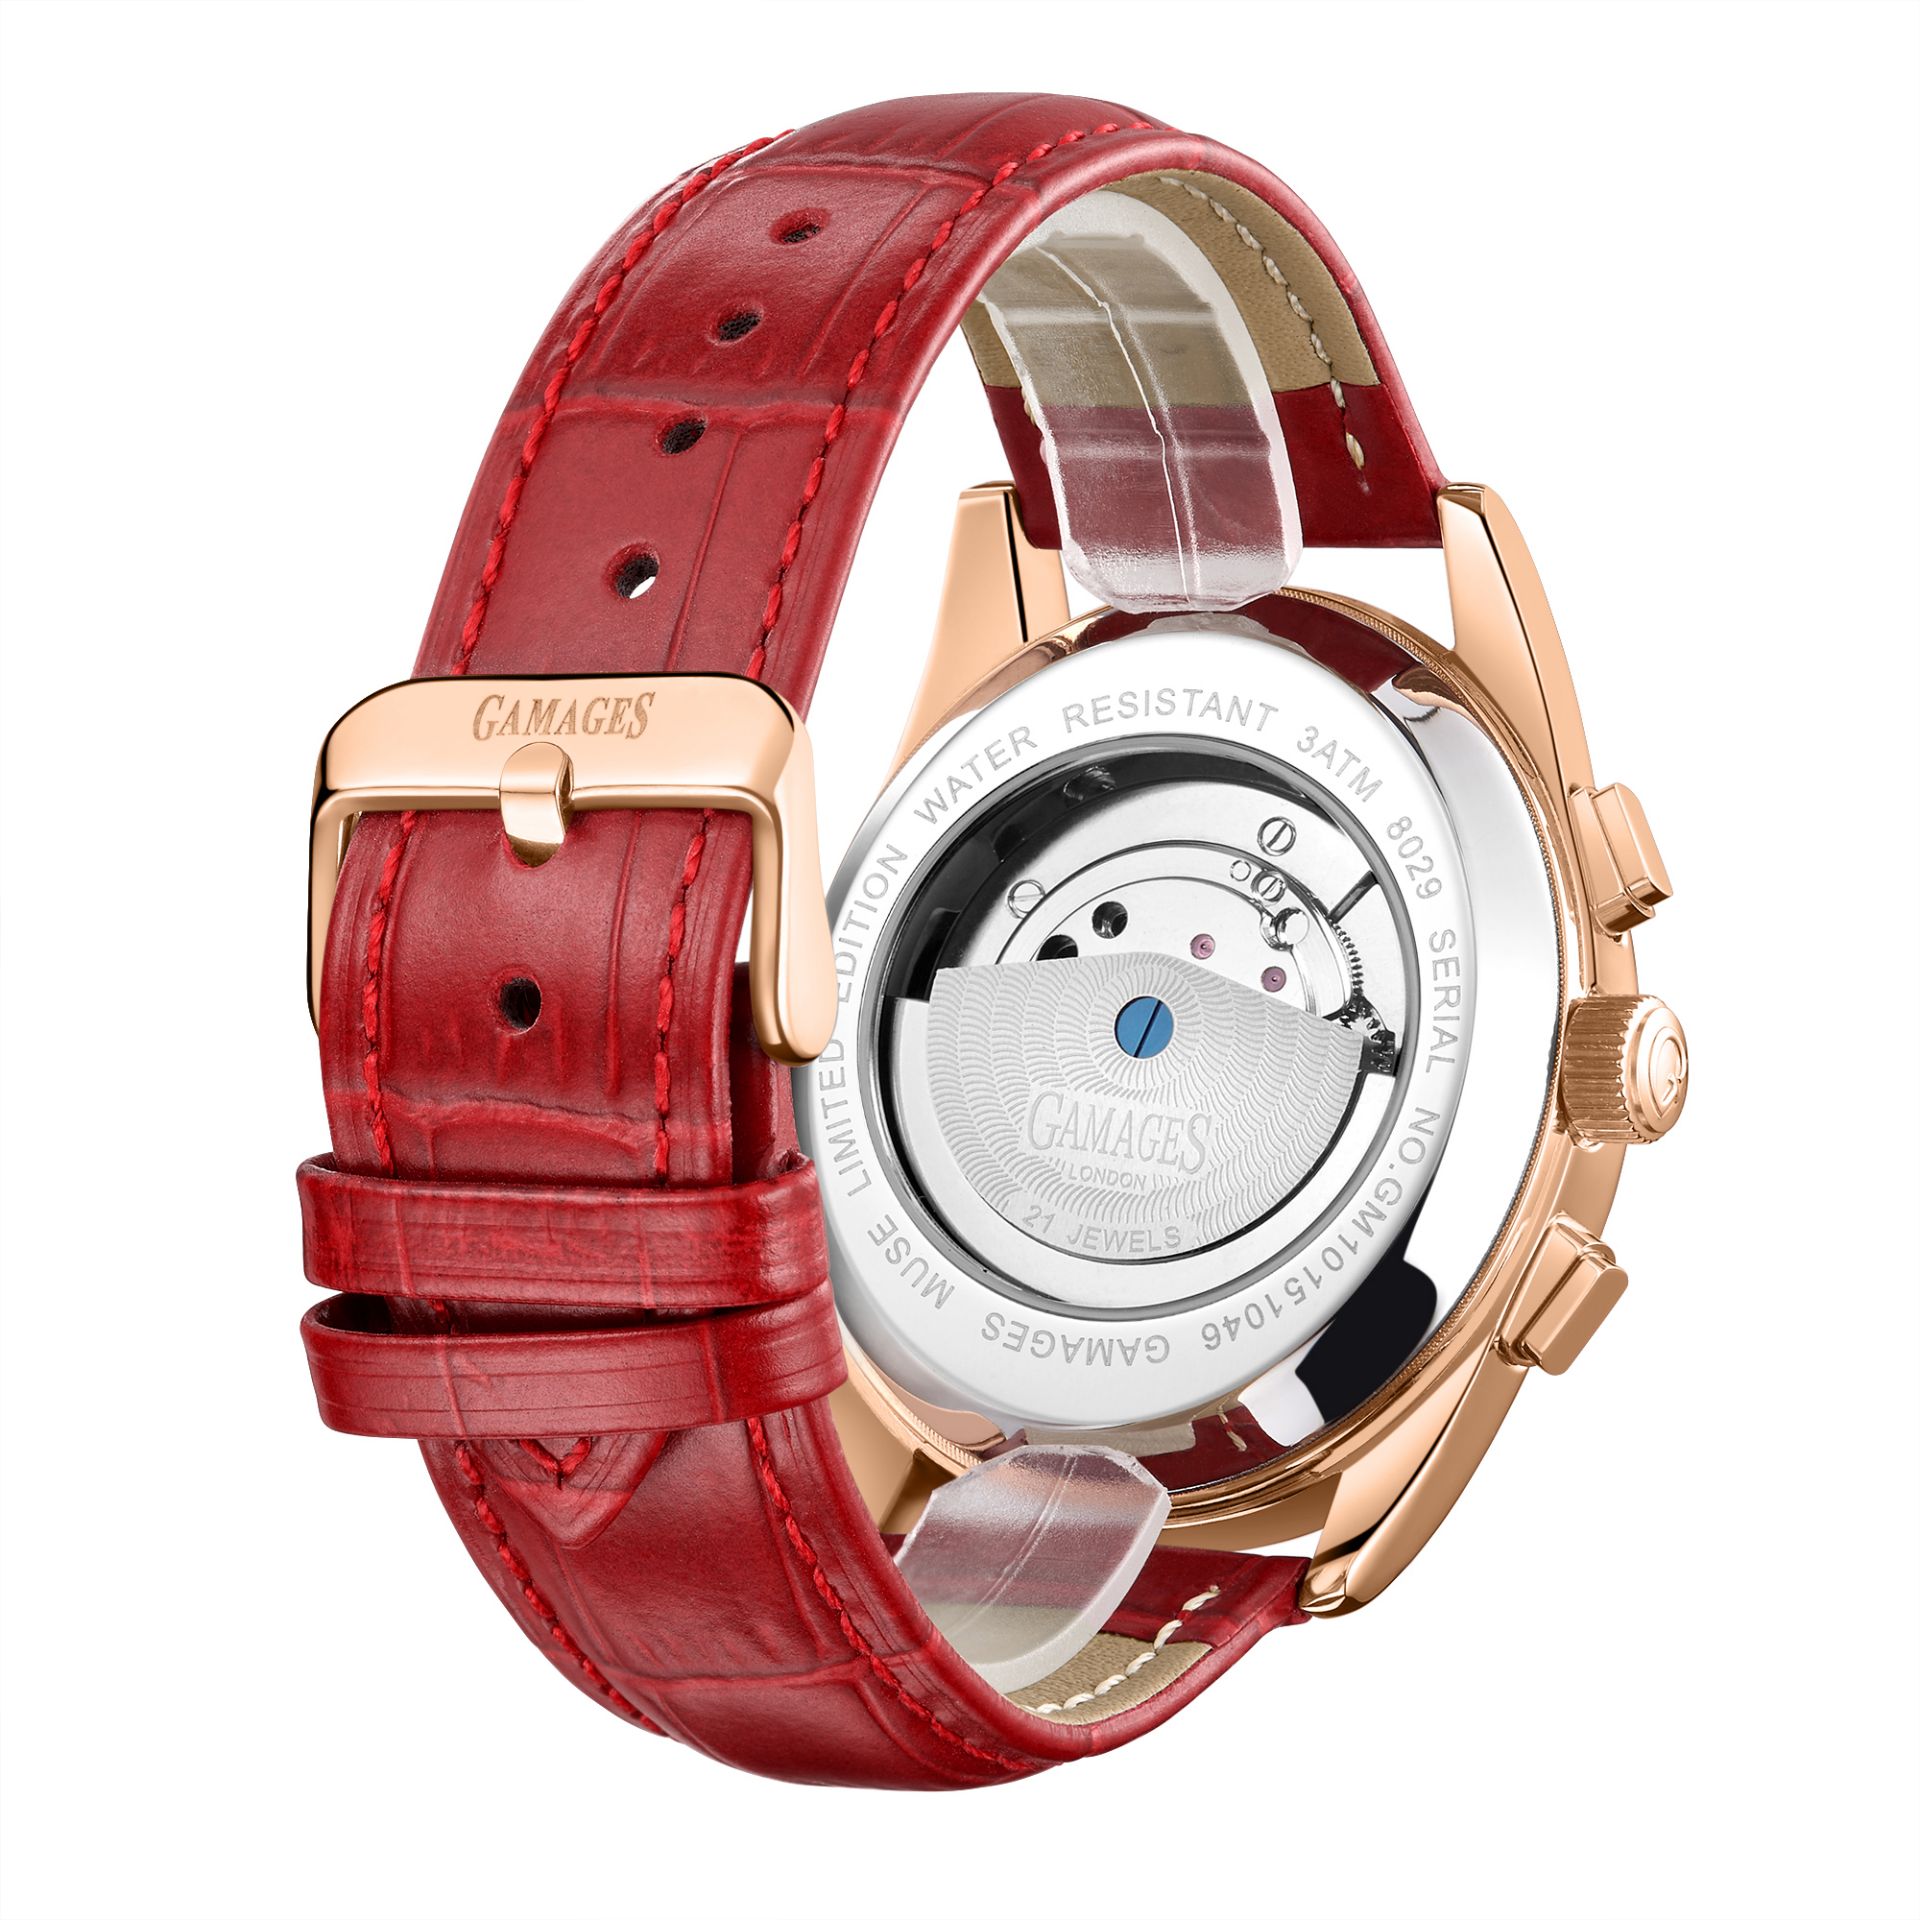 Gamages of London Hand Assembled Muse Automatic Rose Red - 5 Year Warranty and Free Delivery - Image 5 of 5